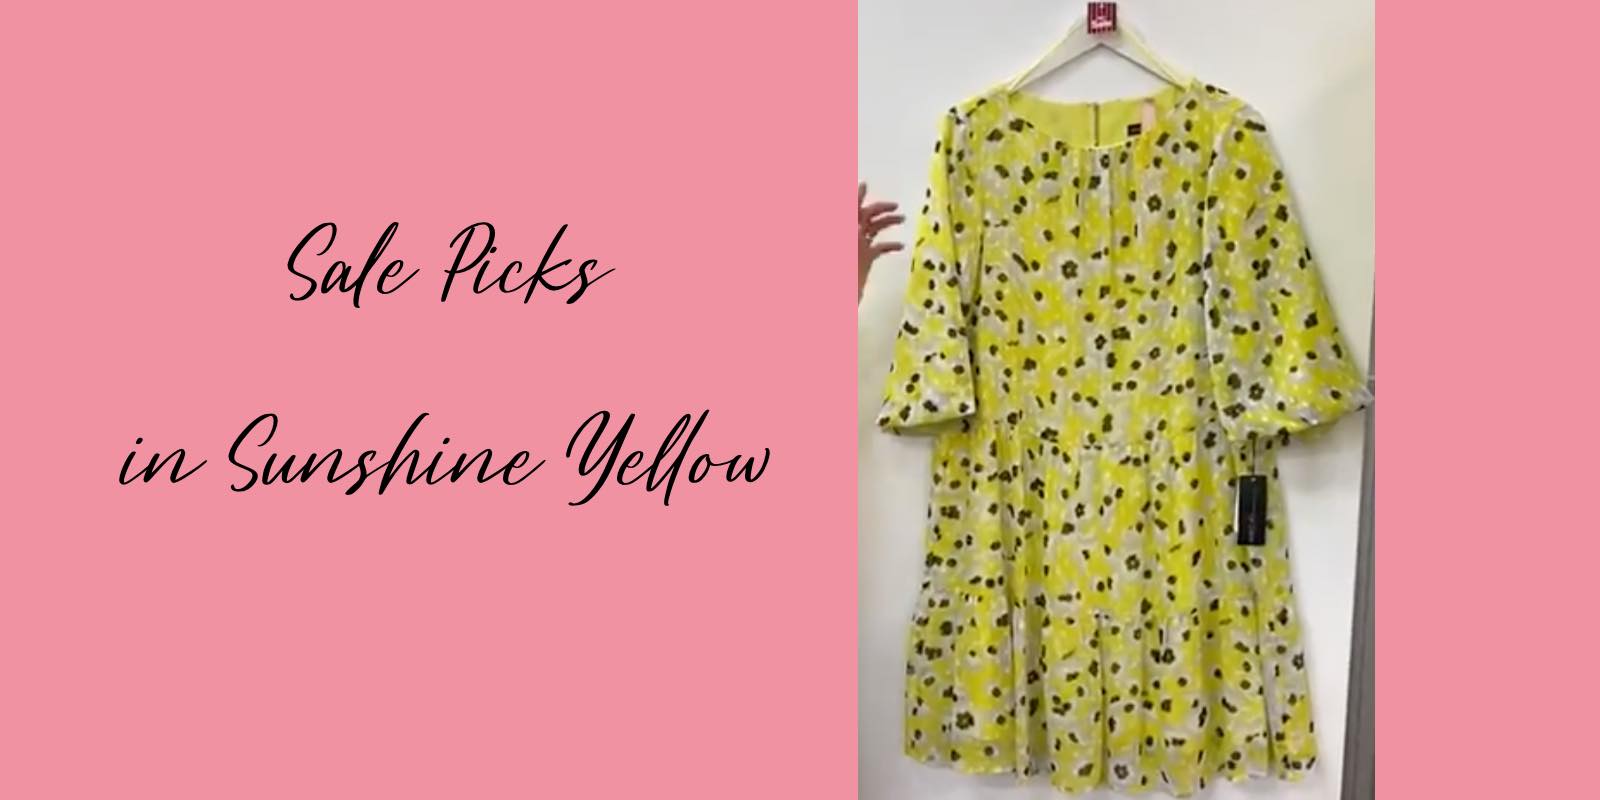 Discover Our Sale Picks in Sunshine Yellow